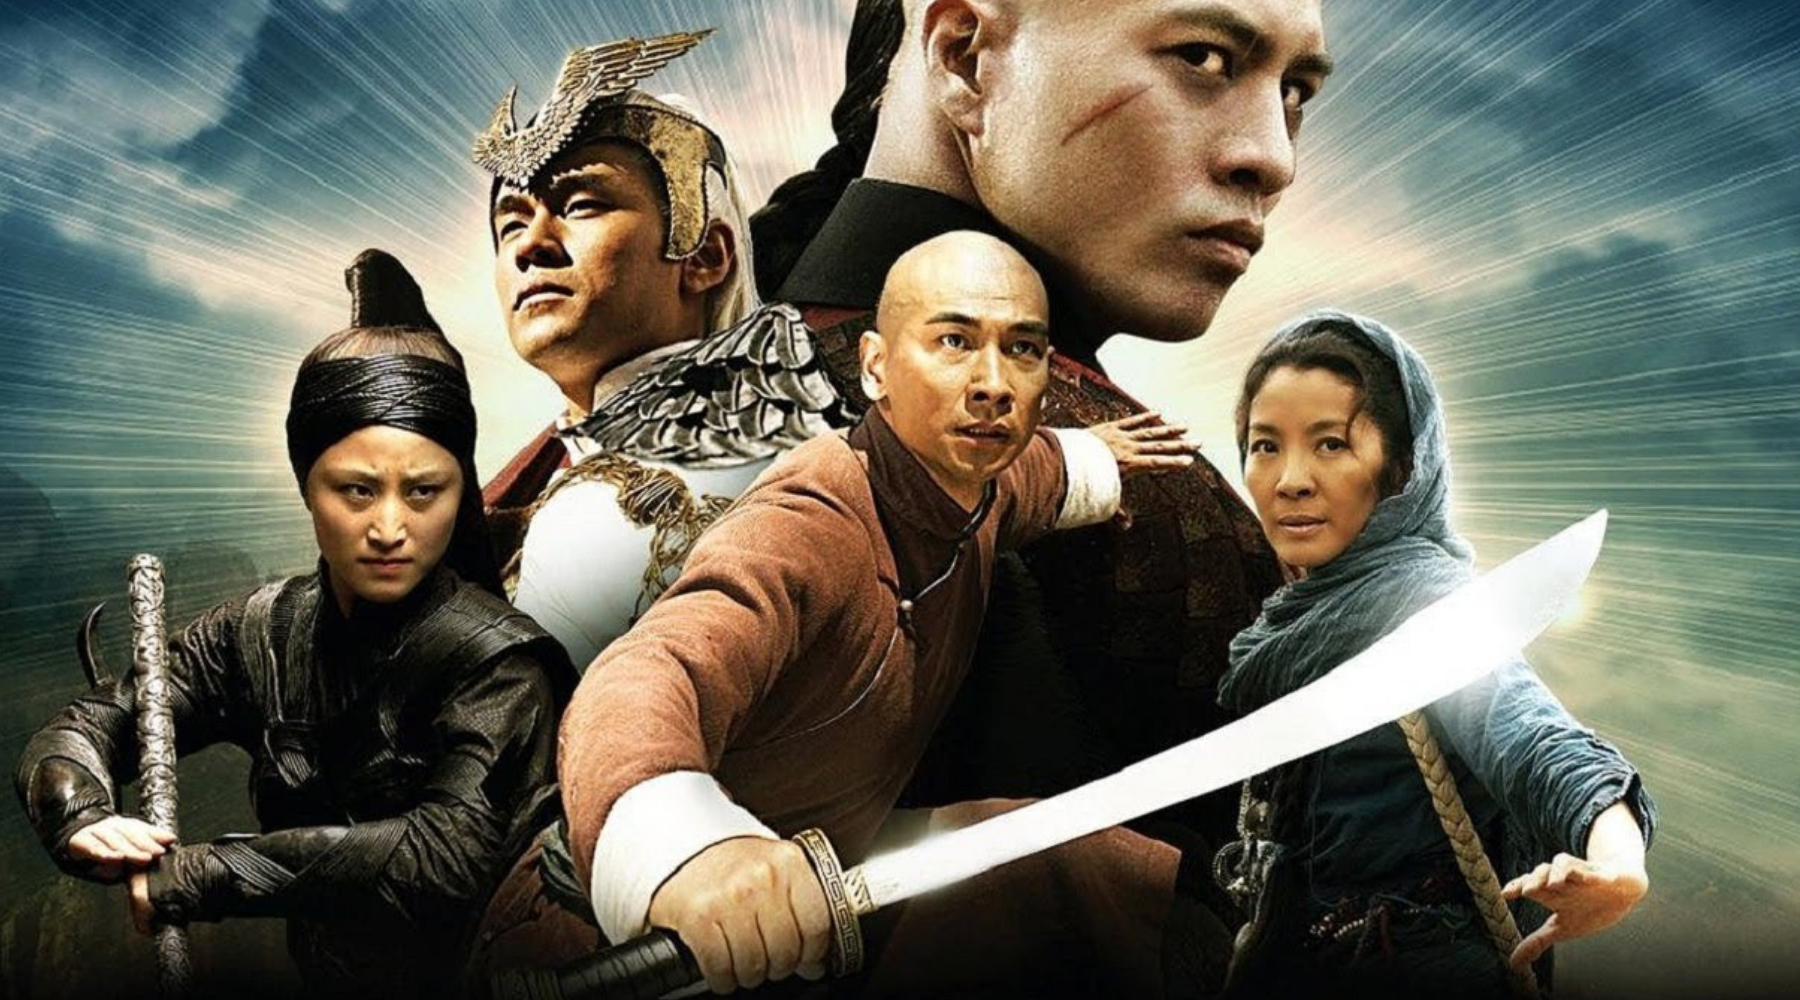 ULTIMATE List of Martial Arts Movies Blogs and Websites that Allow Guest Blogging